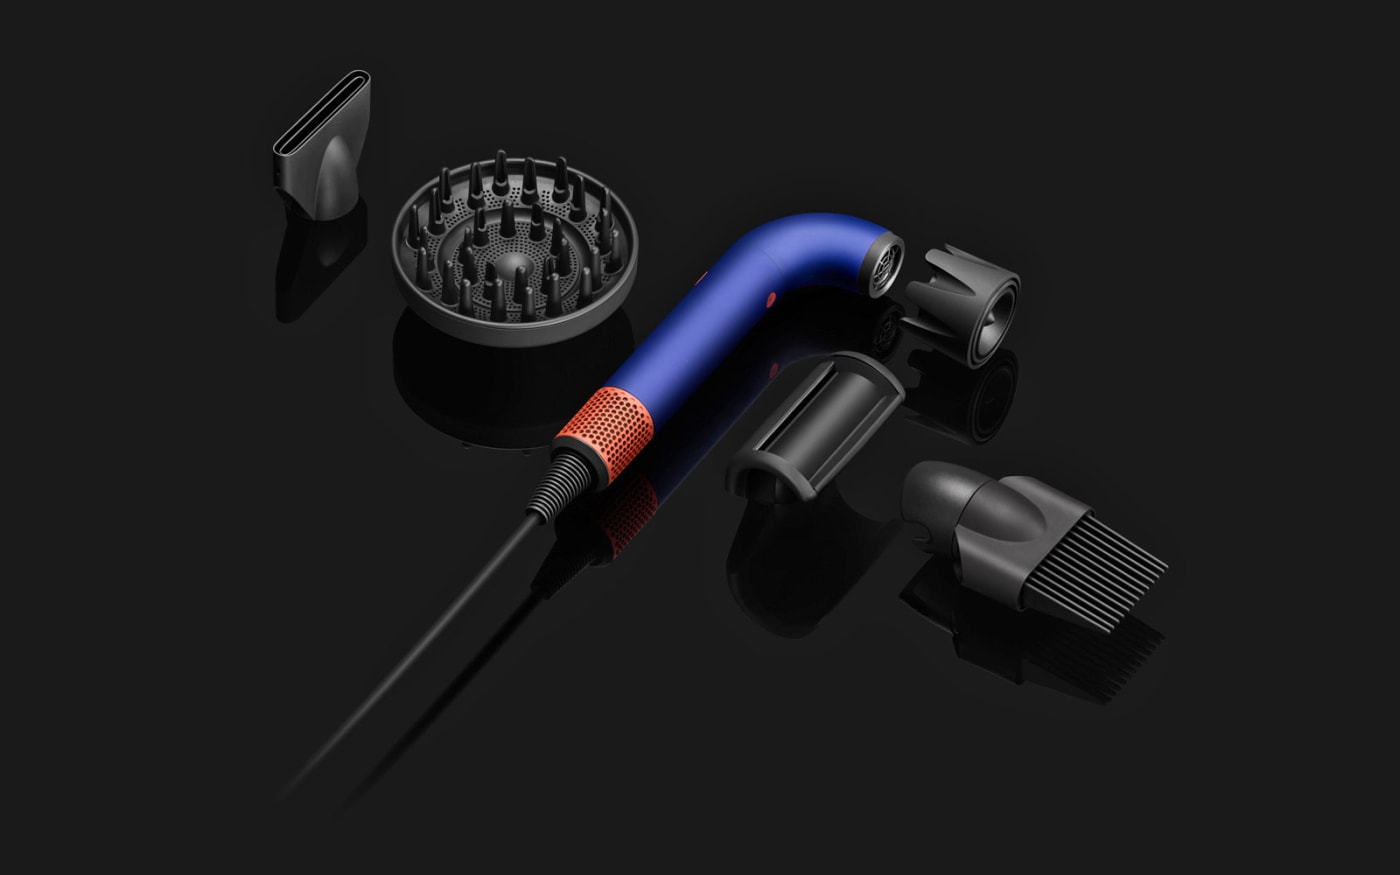 Dyson's new lightweight 'Supersonic r' hairdryer looks a lot like a periscope